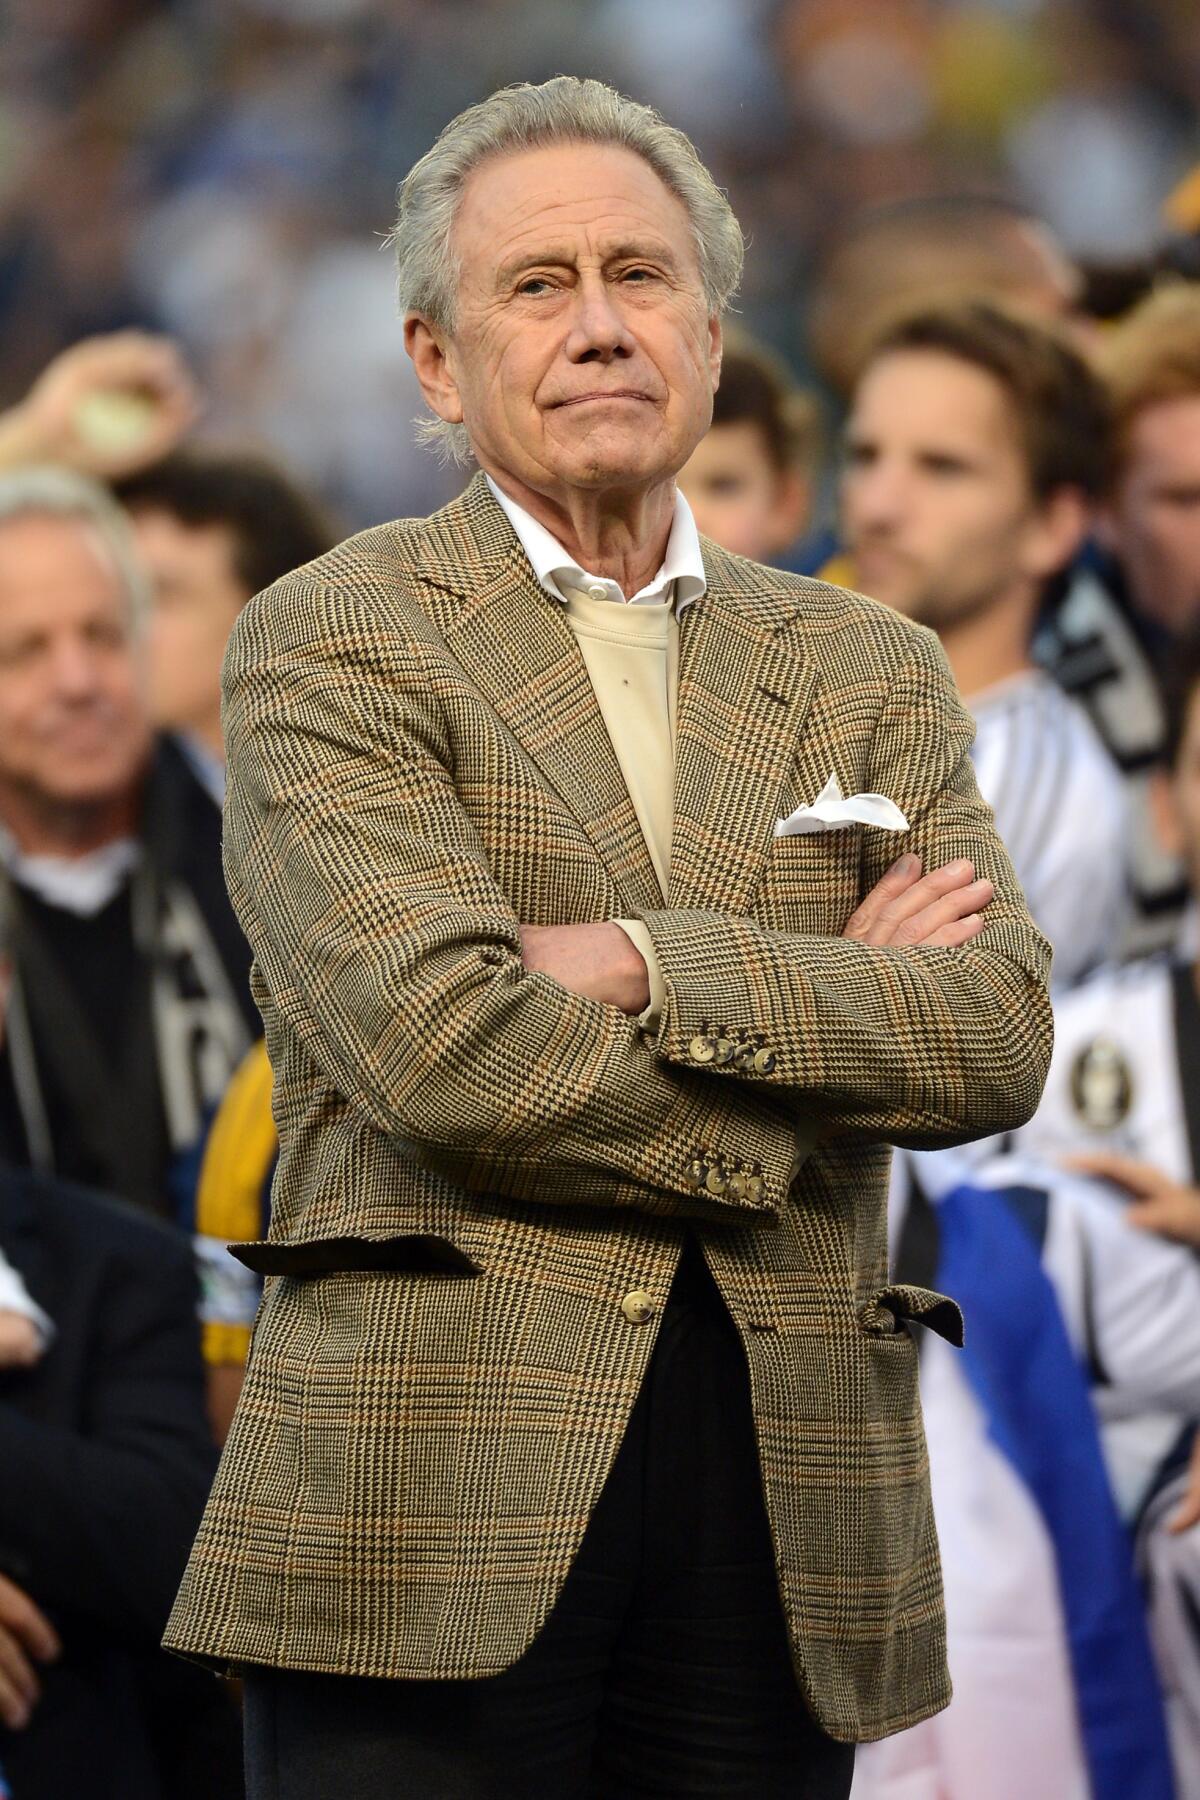 Phil Anschutz stands with his arms crossed